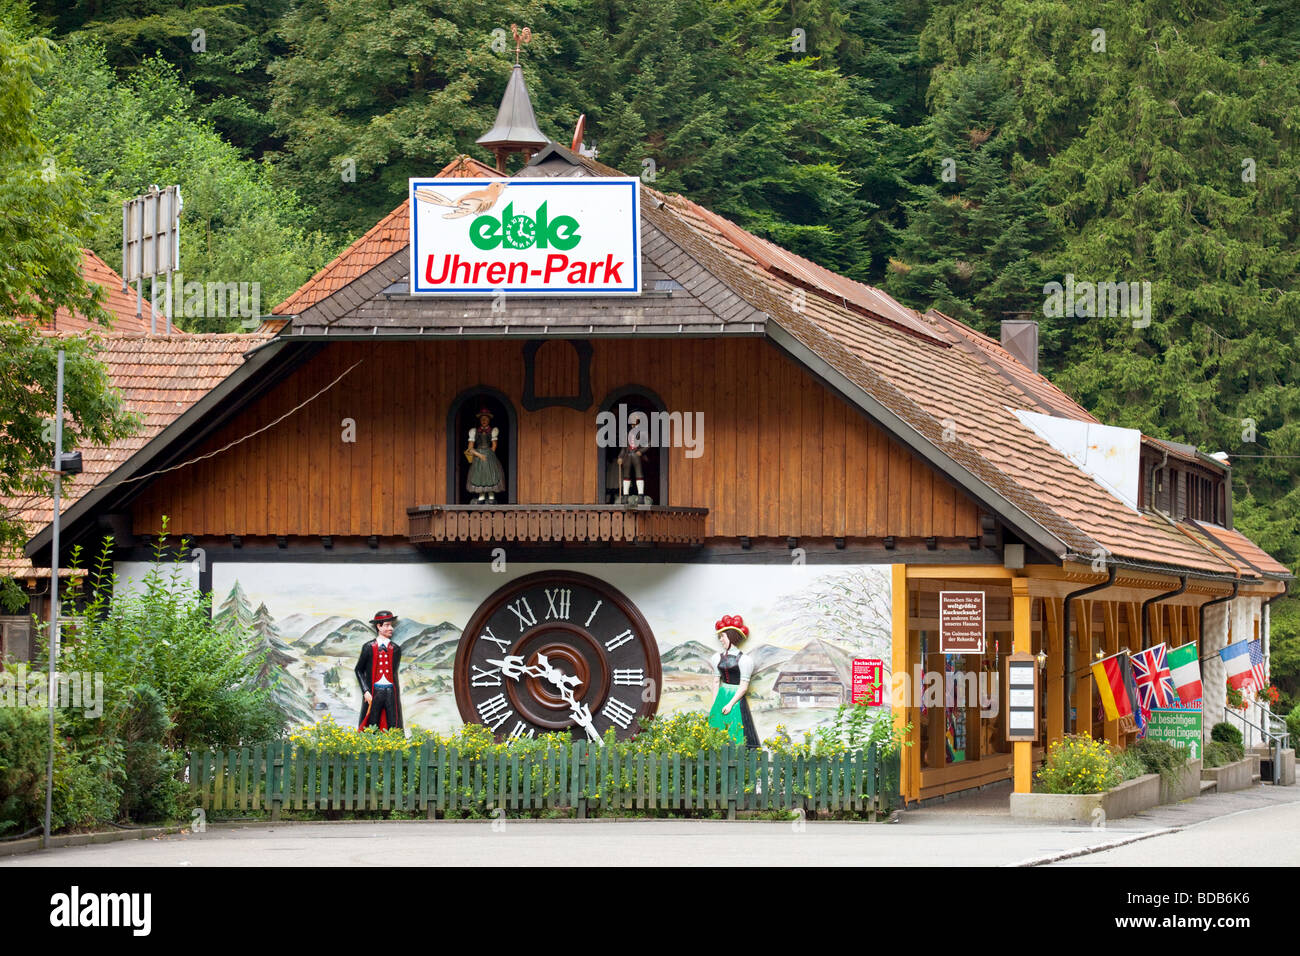 Cuckoo clocks museum and shop with the largest Cuckoo clock in the world in Triberg, Schwarzwald, Germany. Stock Photo